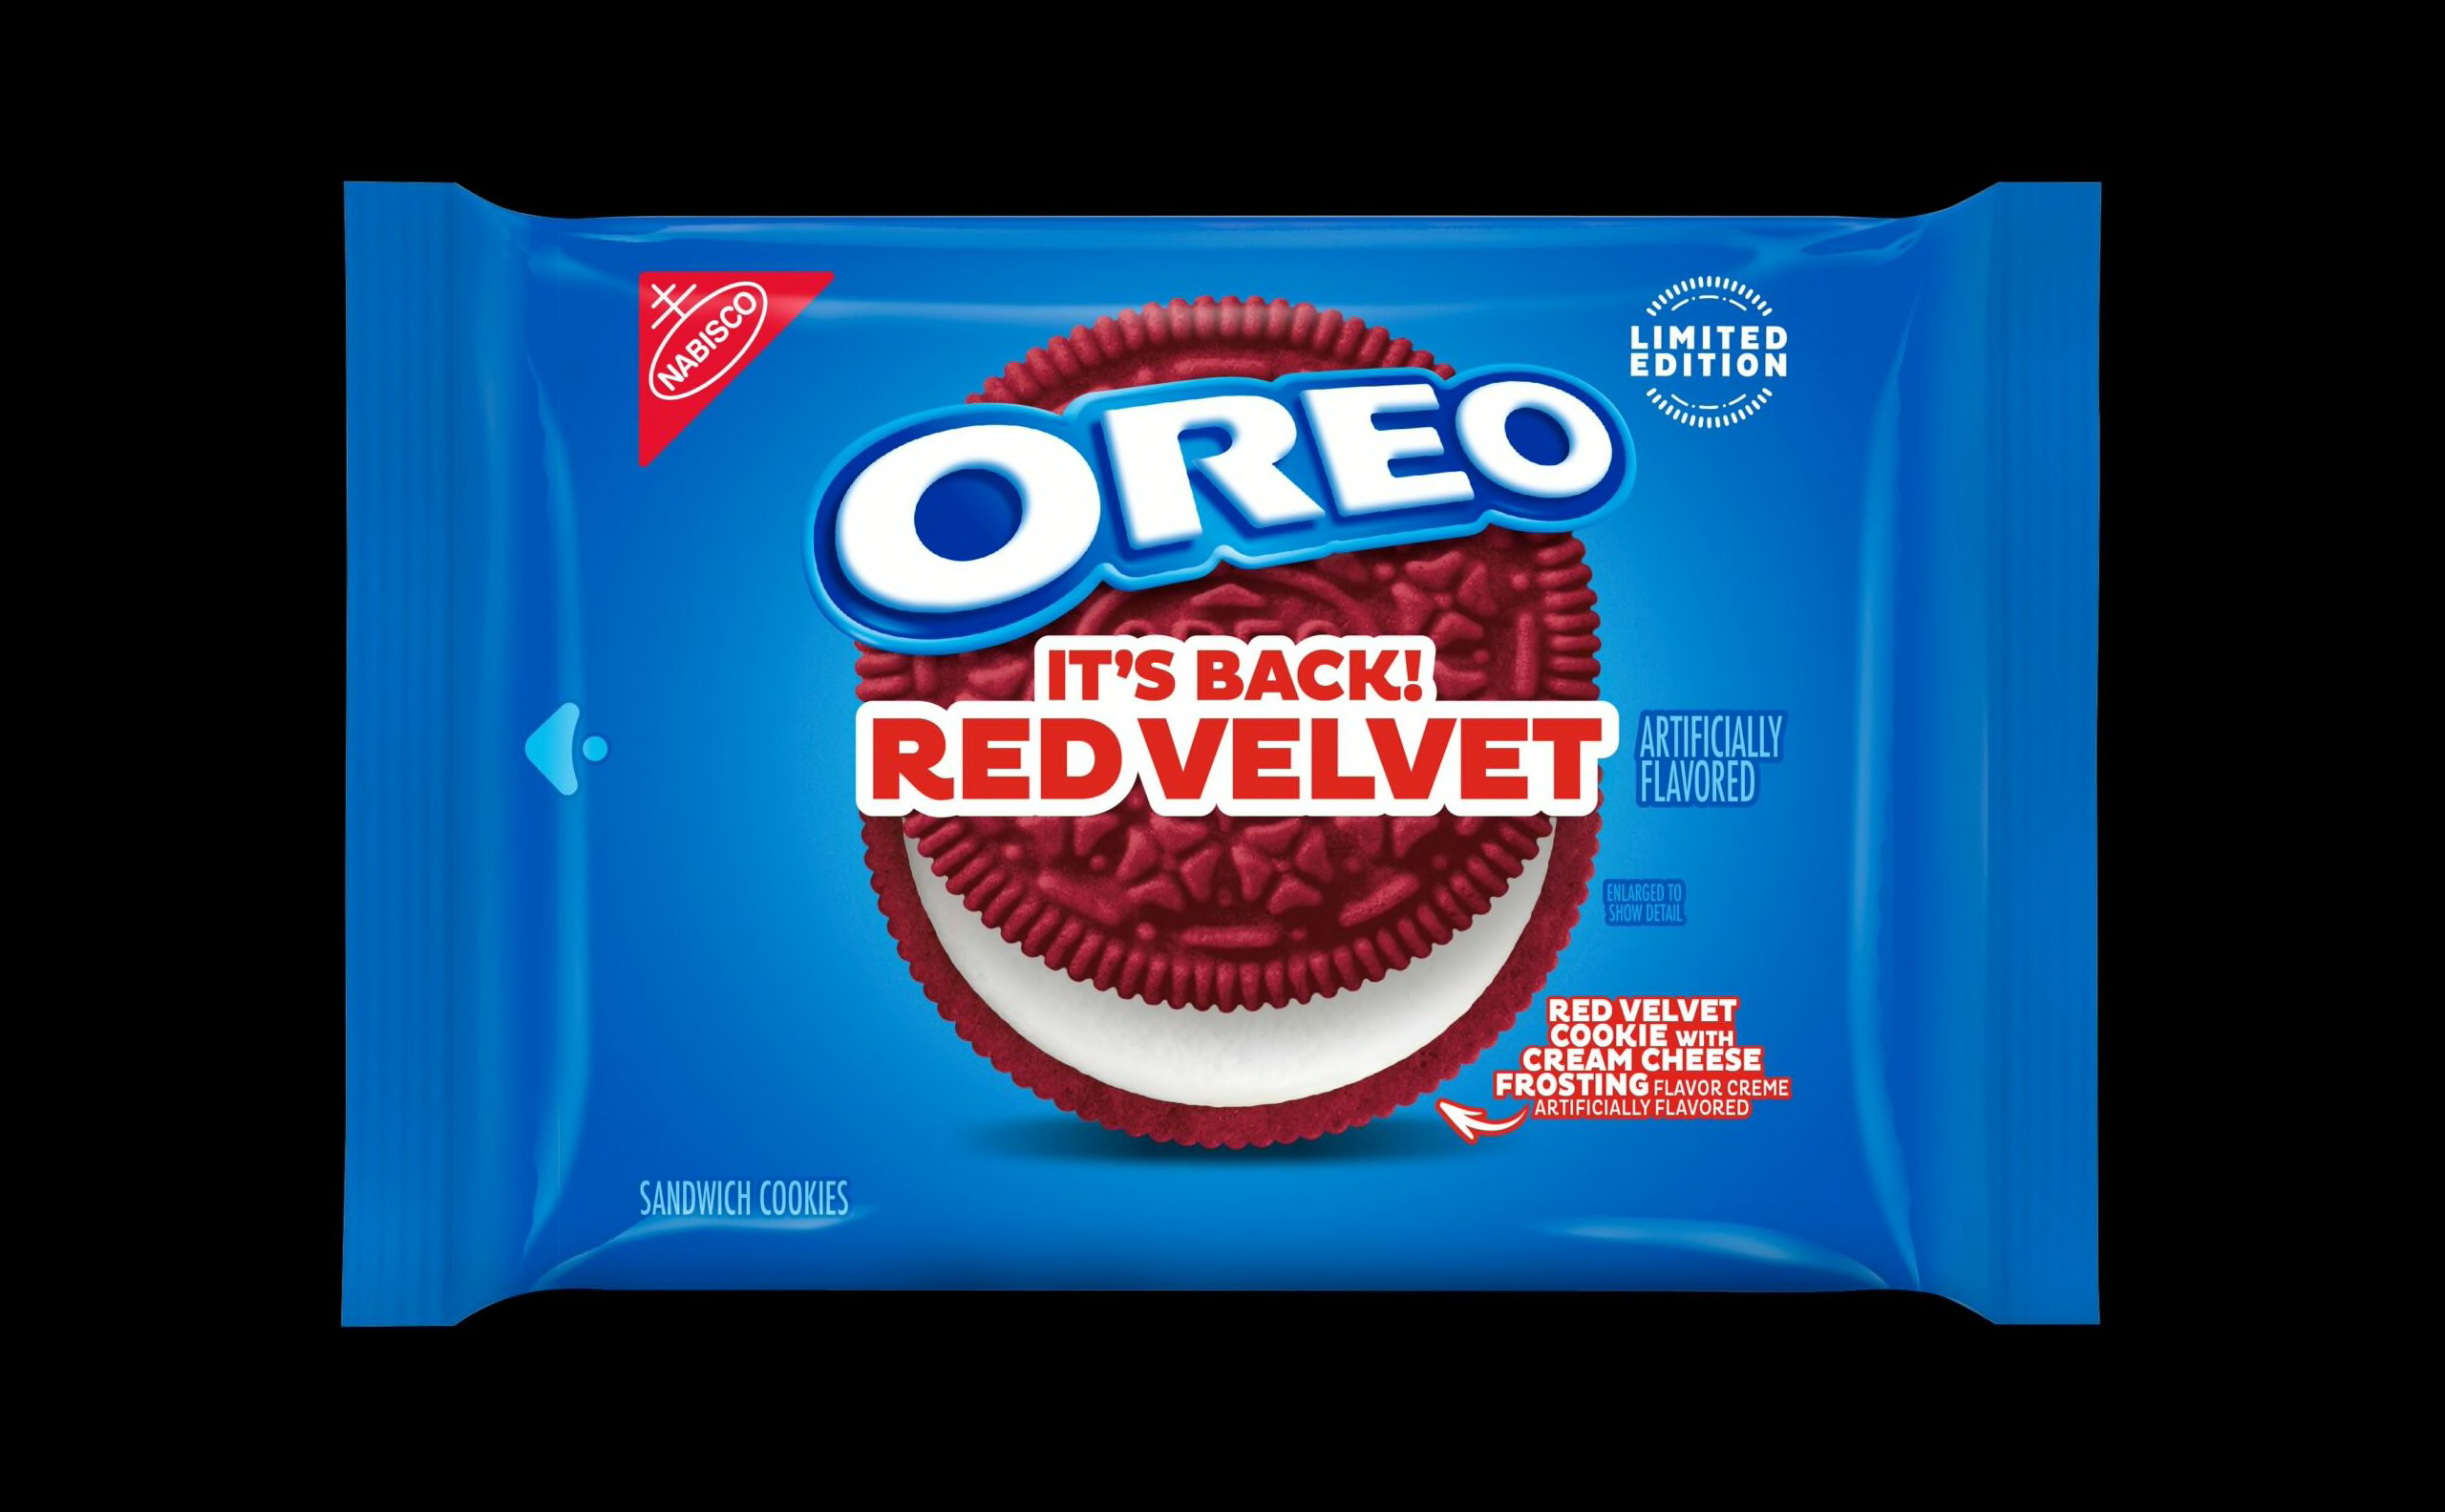 OREO’s most requested flavor